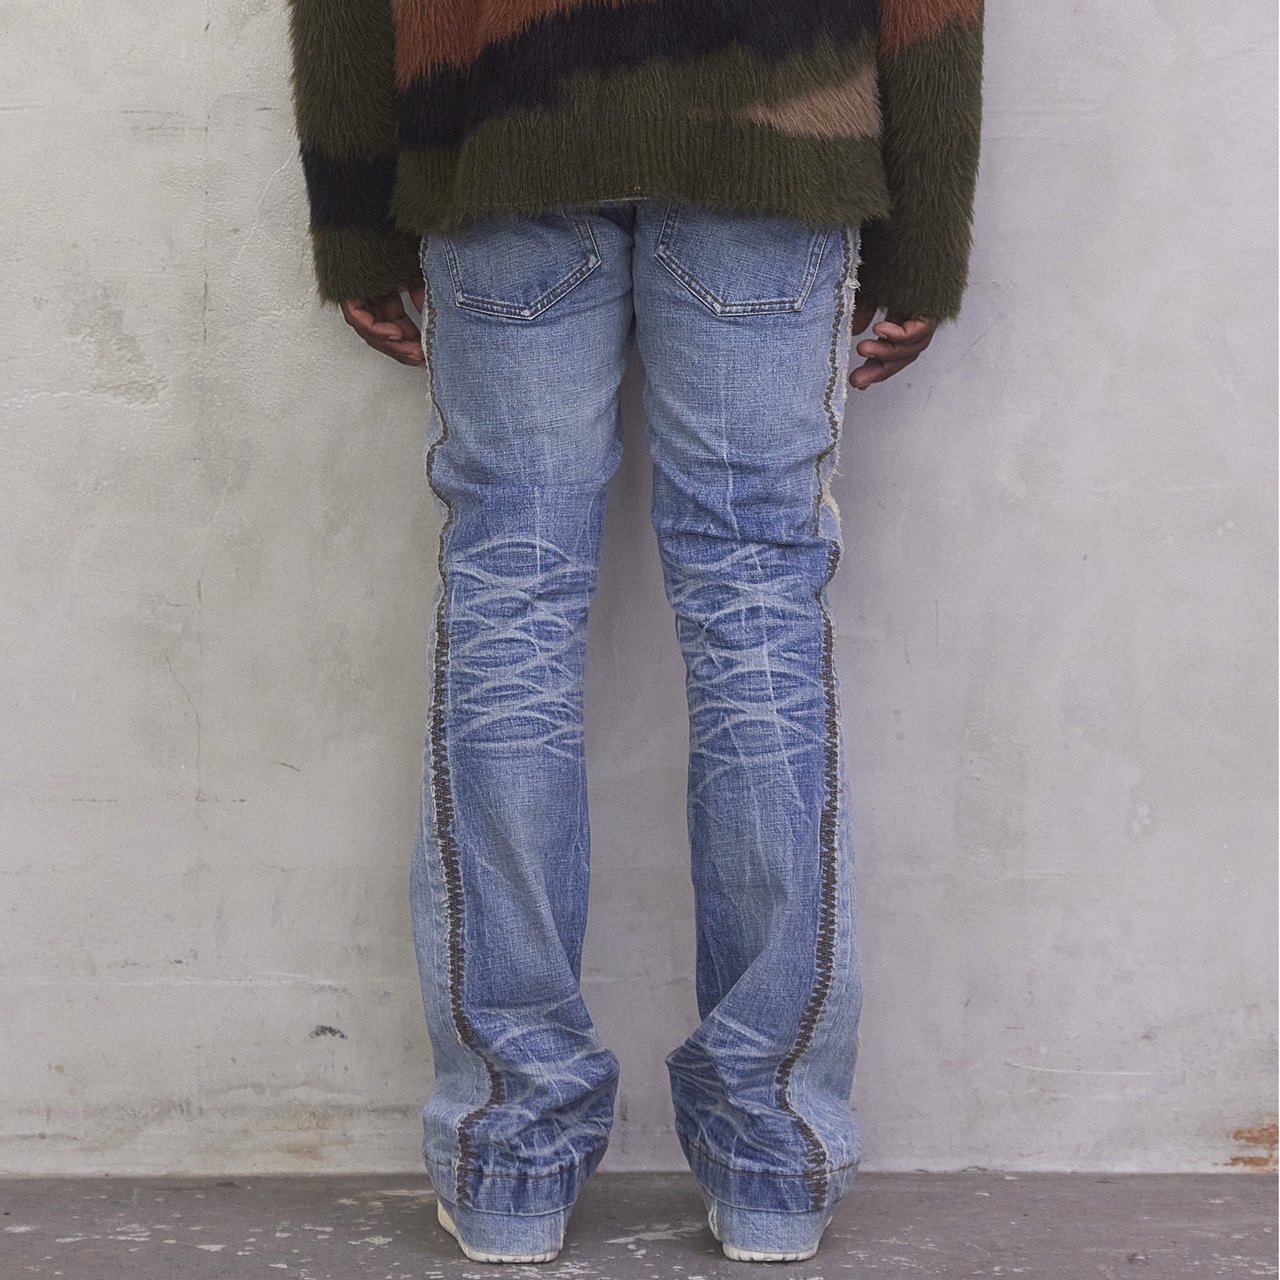 MLVINCE (メルヴィンス) 23AW/秋冬
DB FLARE JEANS INDIGO